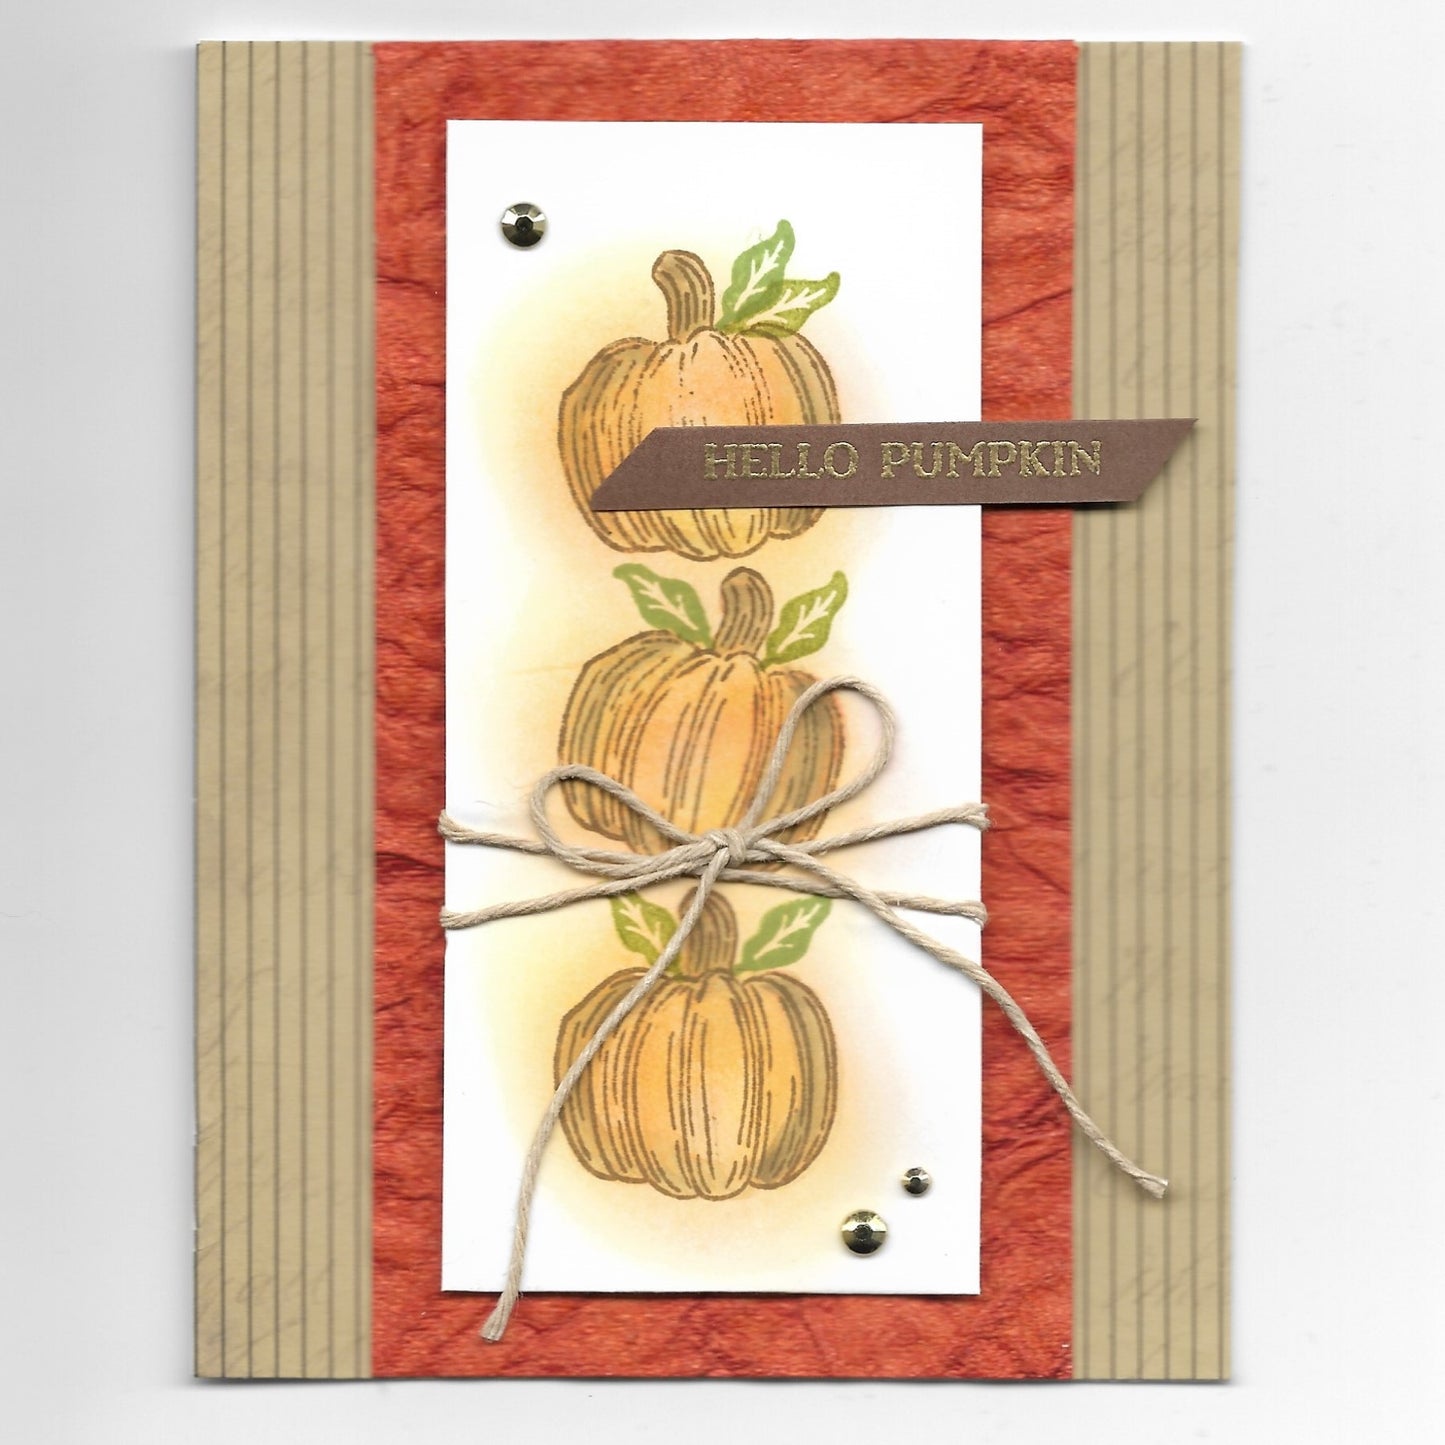 Greeting Cards, Autumn